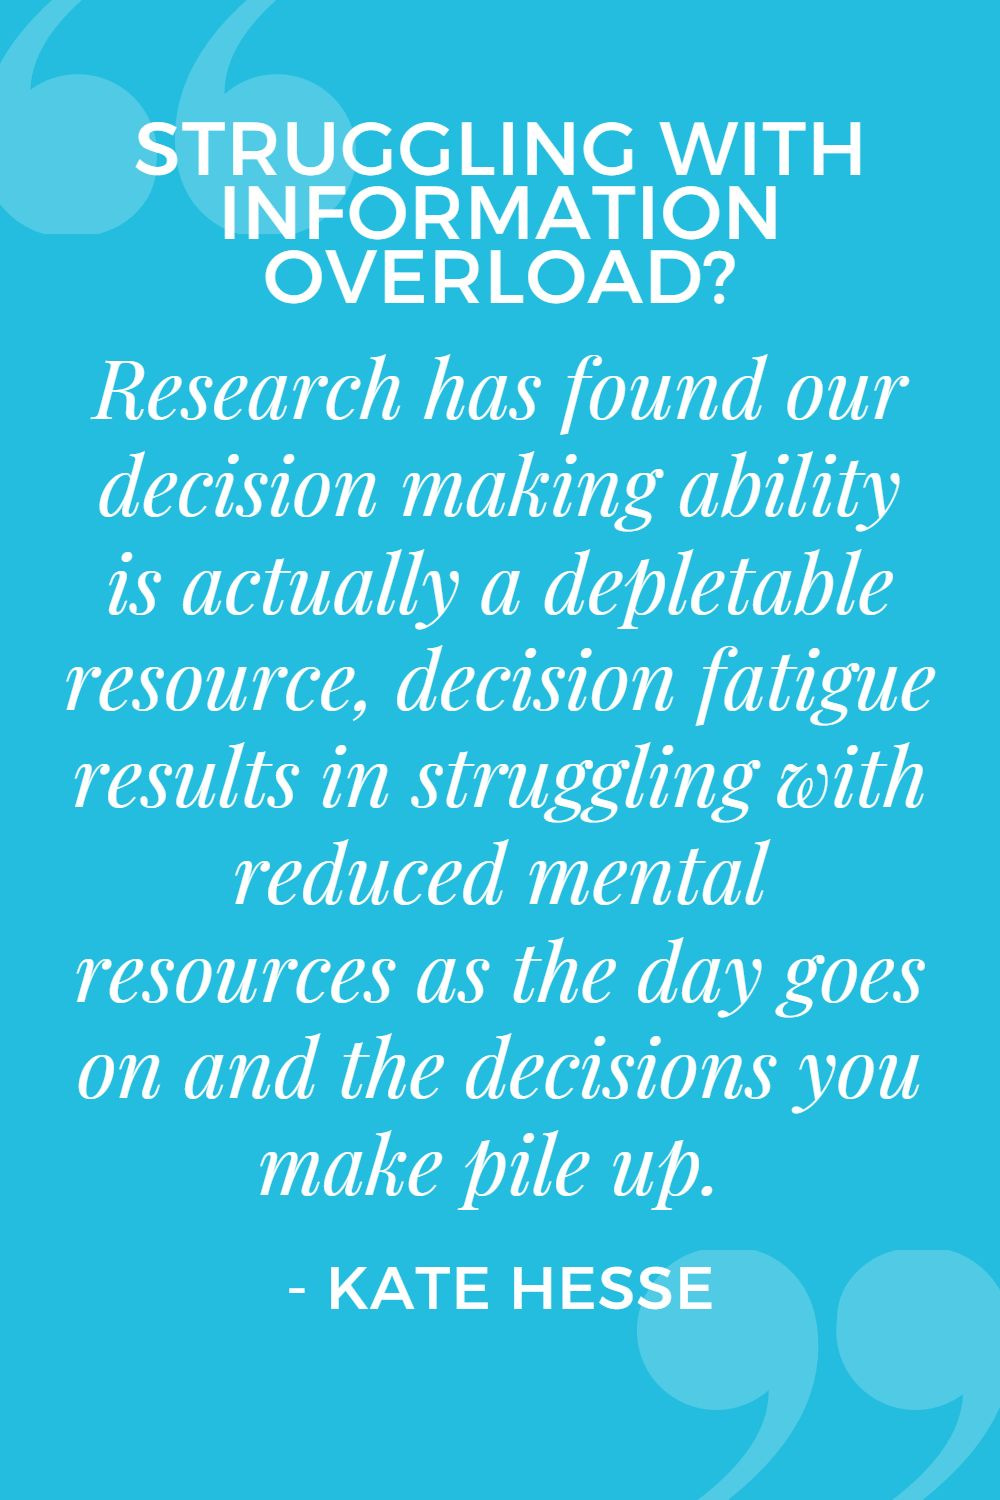 Research has found our decision making ability is actually a depletable resource, decision fatigue results in struggling with reduced mental resources as the day goes on and the decisions you make pile up.